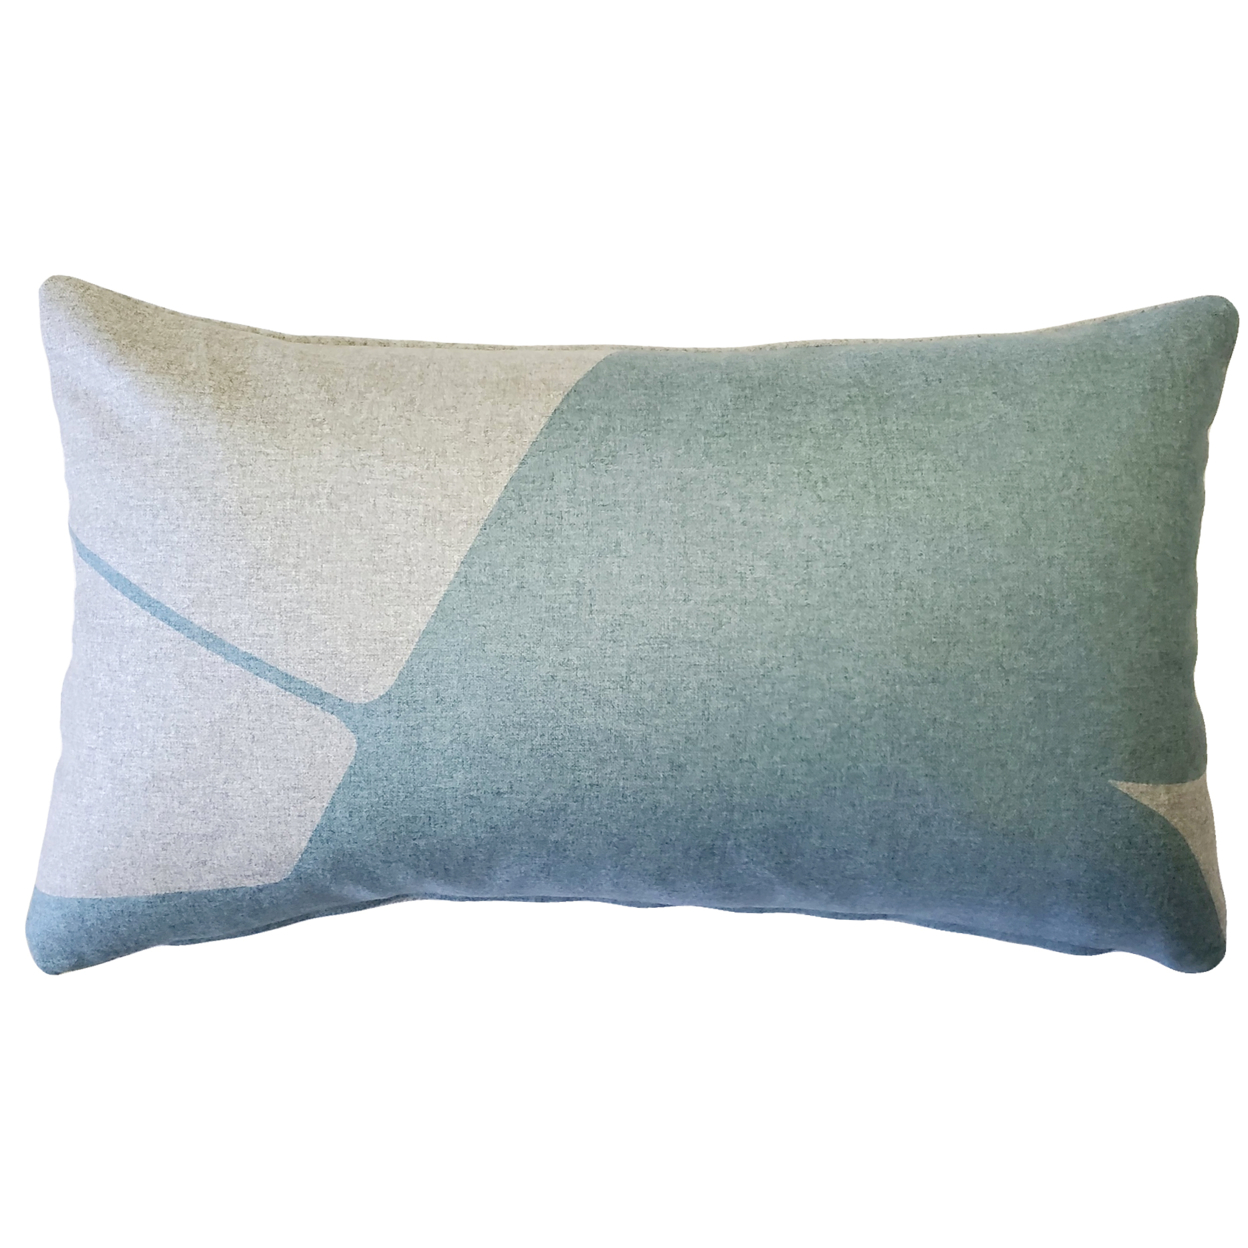 Boketto Paradiso Blue Throw Pillow 12x19 Inches Square, Complete Pillow With Polyfill Pillow Insert